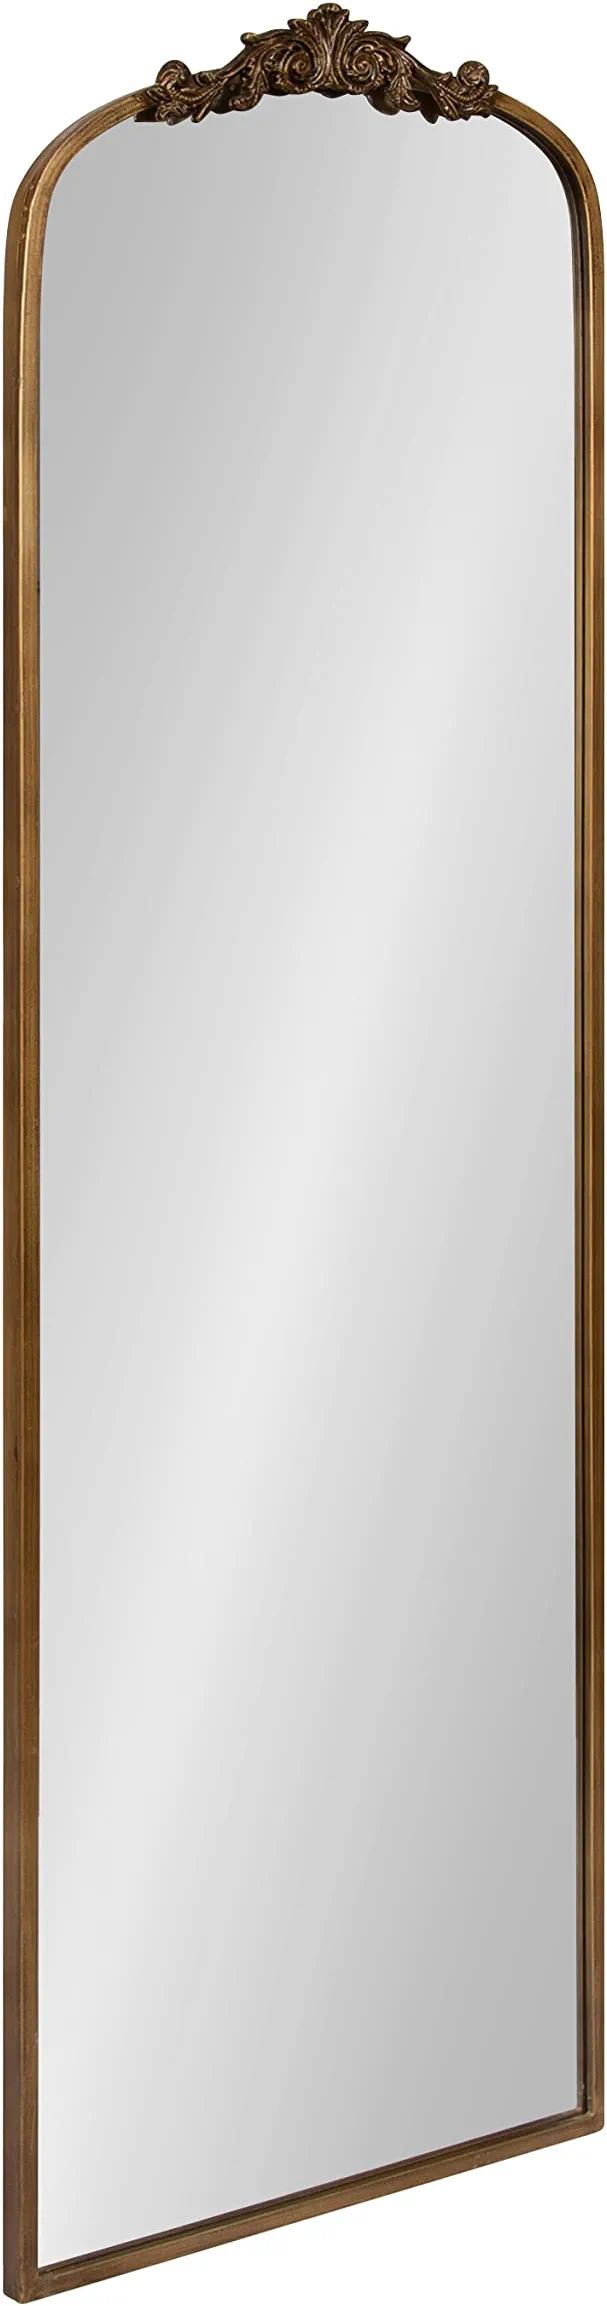 Kate and Laurel Arendahl Antique Vintage Full-Length Arched Wall Mirror for Traditional Home Déc... | Amazon (US)